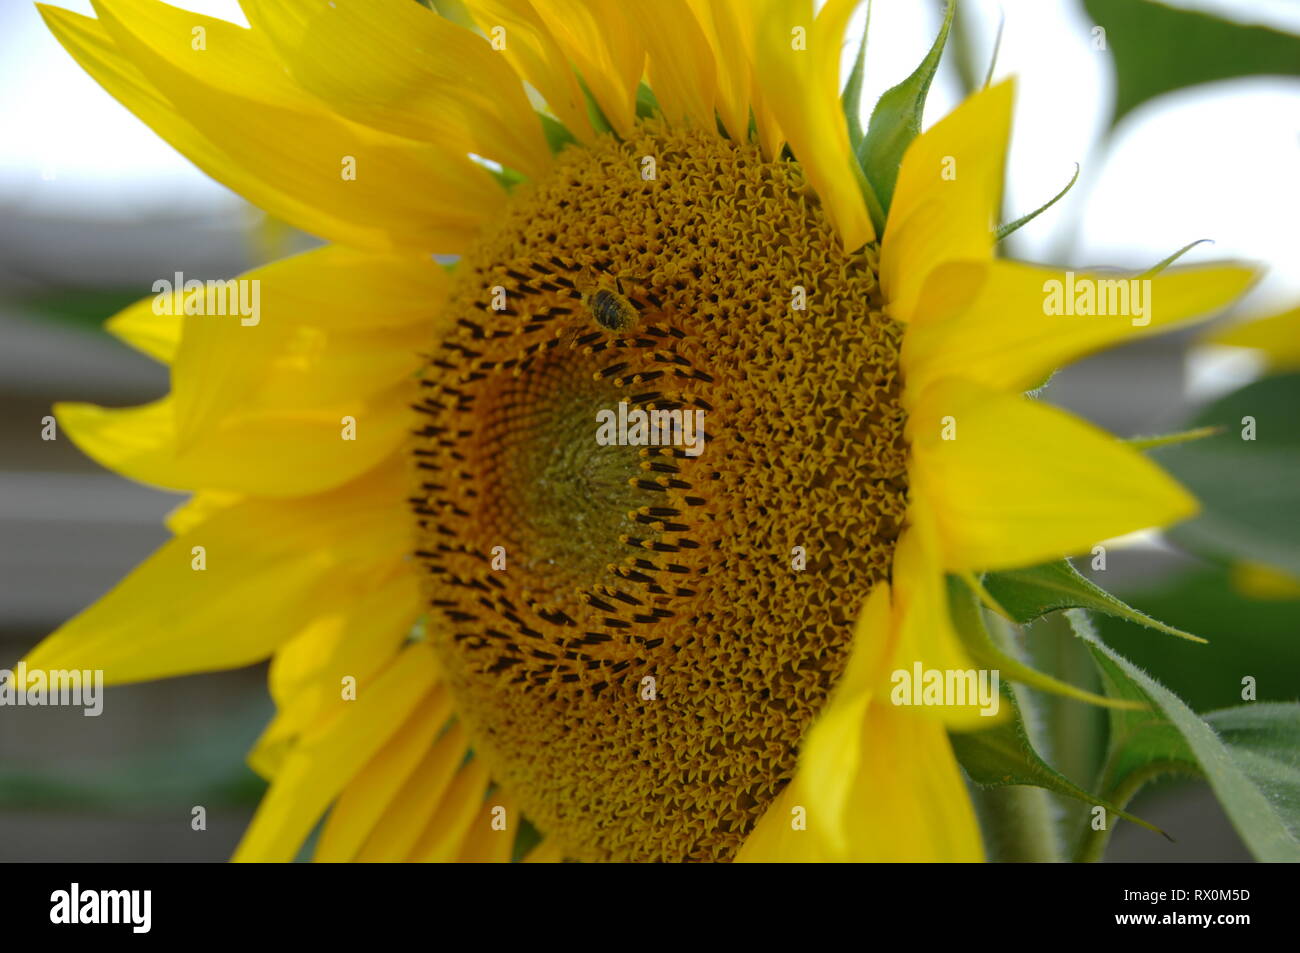 Yellow Sunflower with a Pollen covered bee Stock Photo